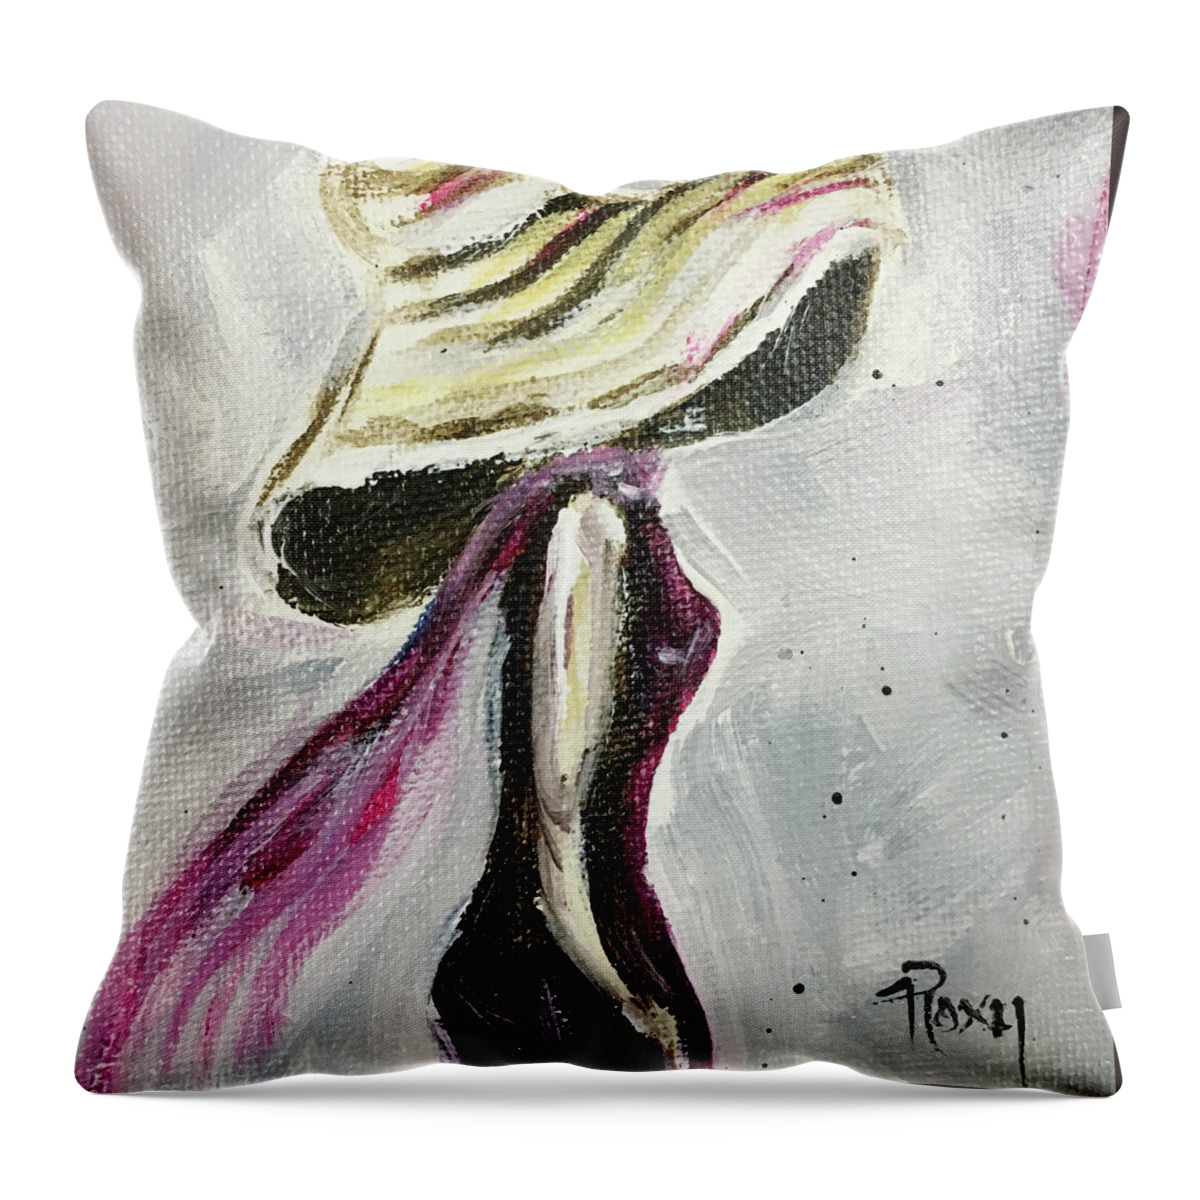 Lady In A Hat Throw Pillow featuring the painting Lady in a Big Hat by Roxy Rich